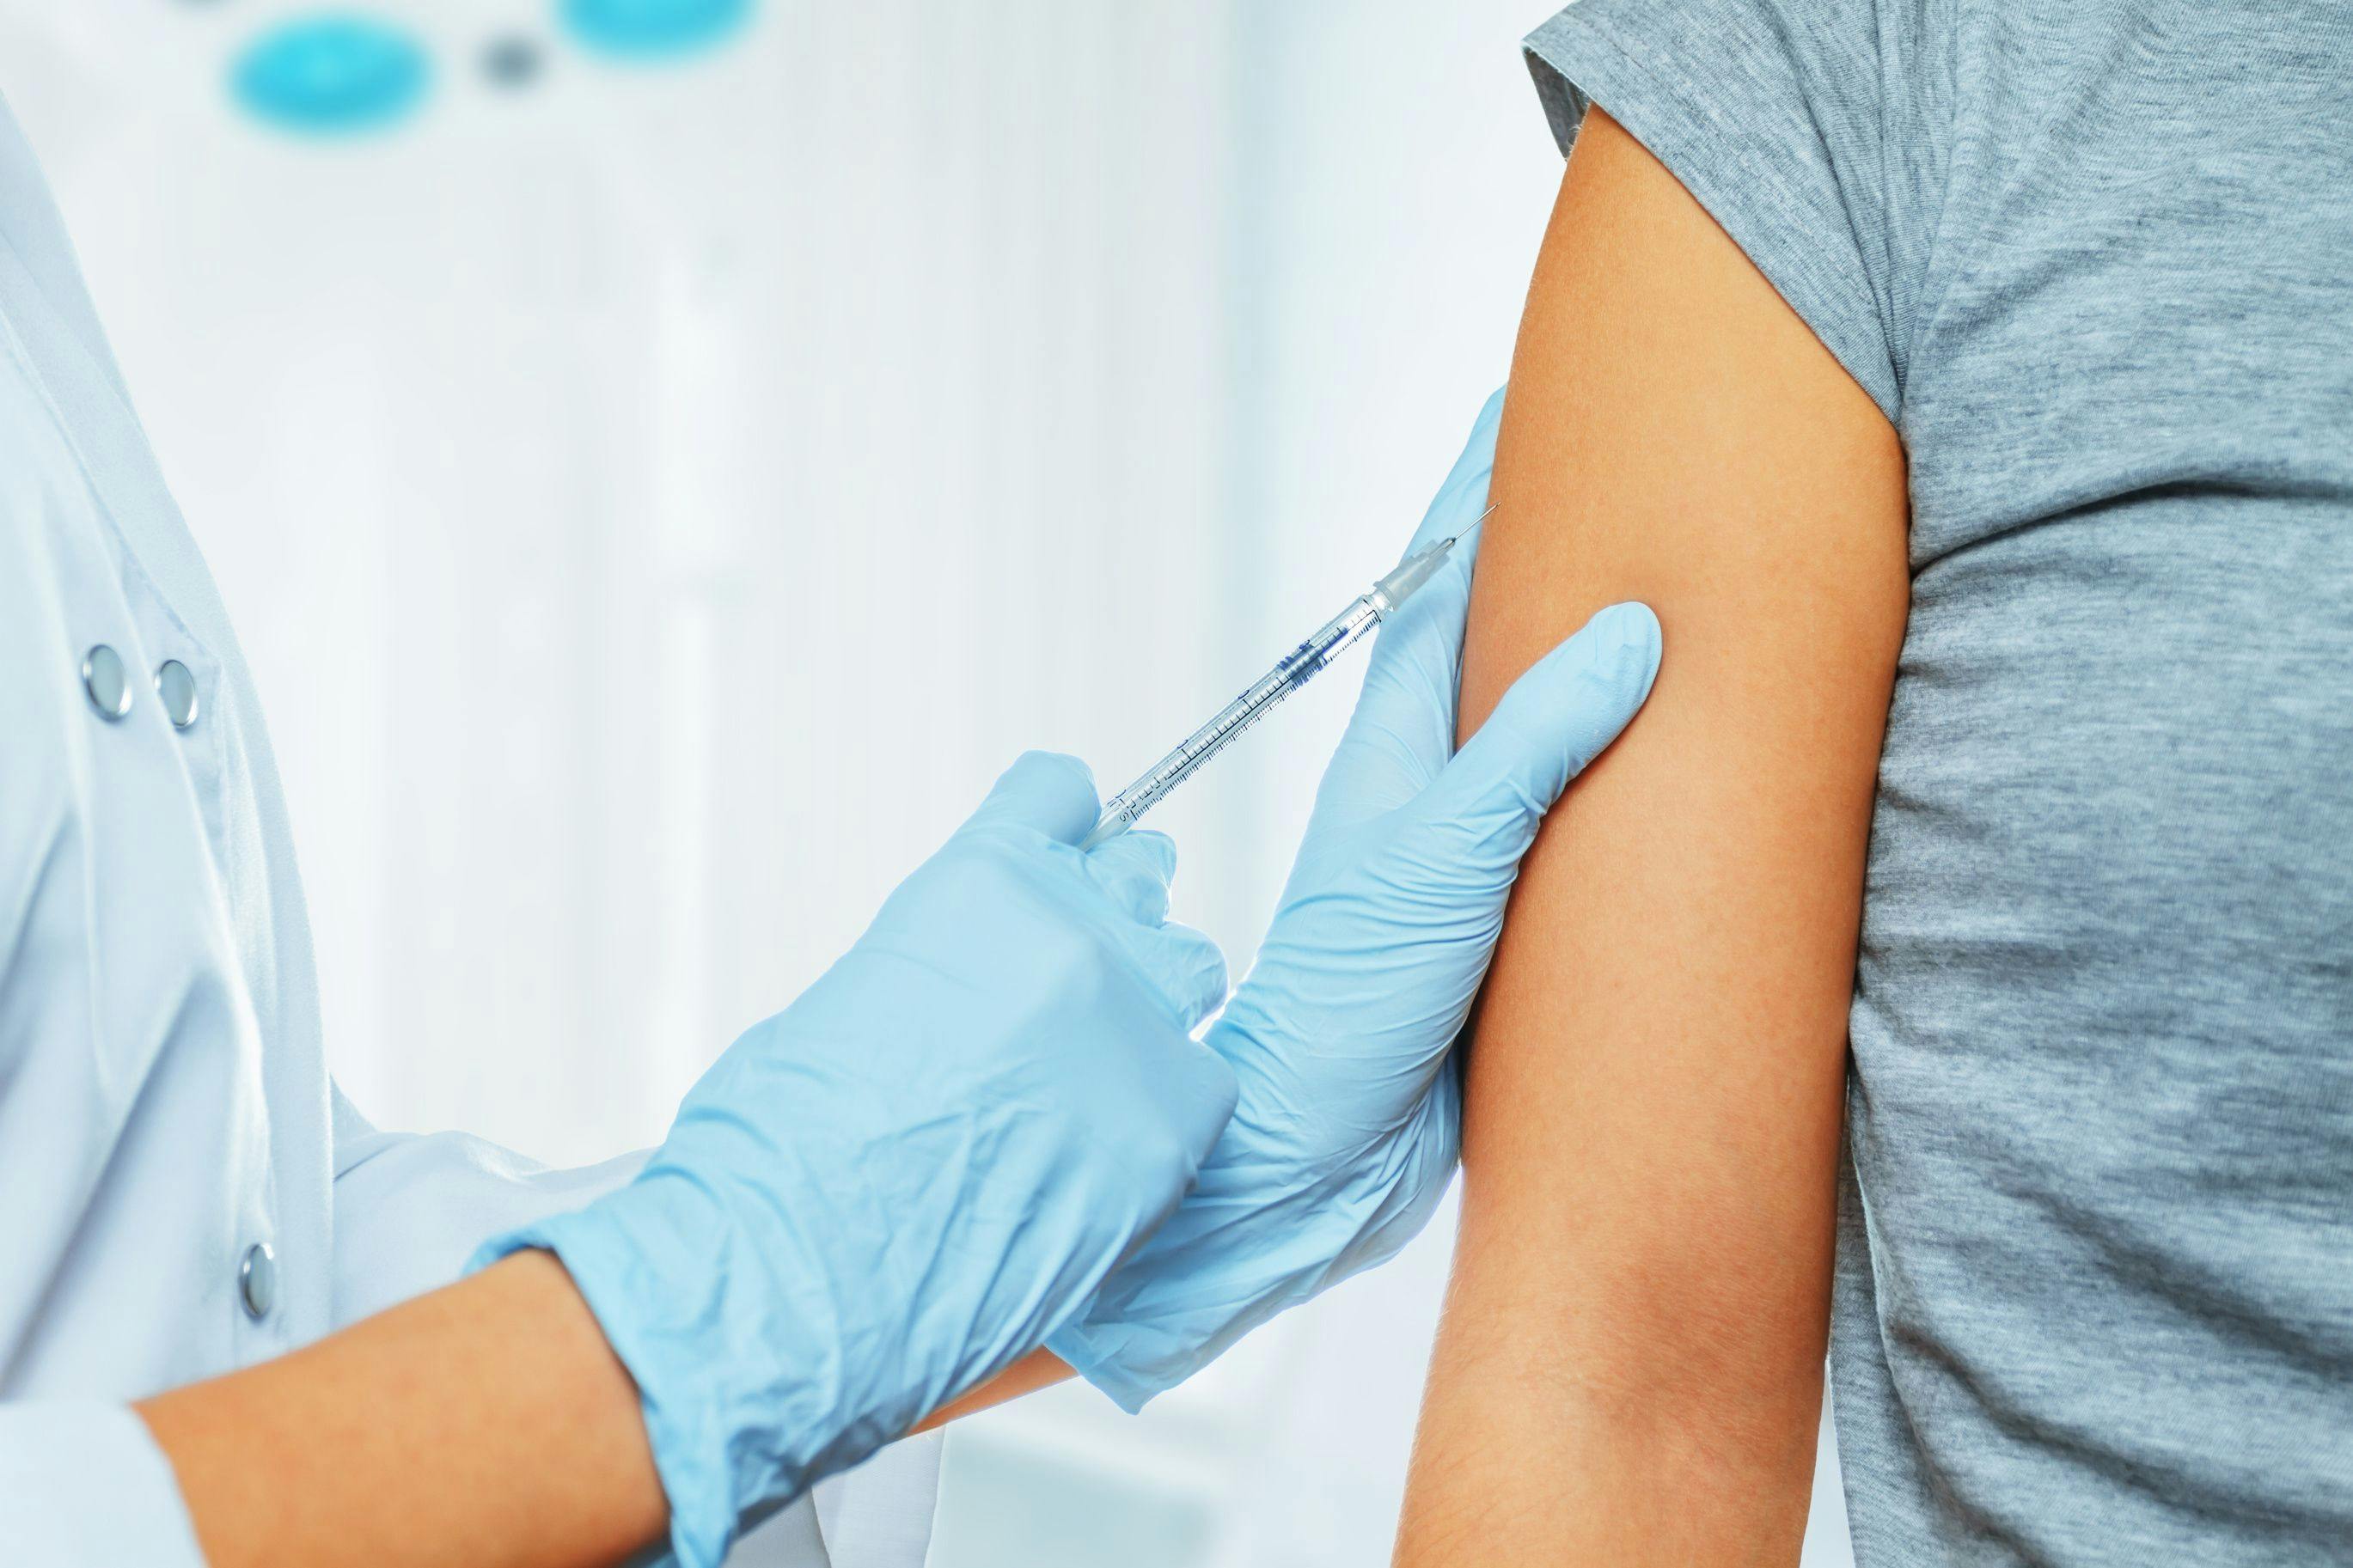 Poll: Do you plan to get immunized for COVID-19?